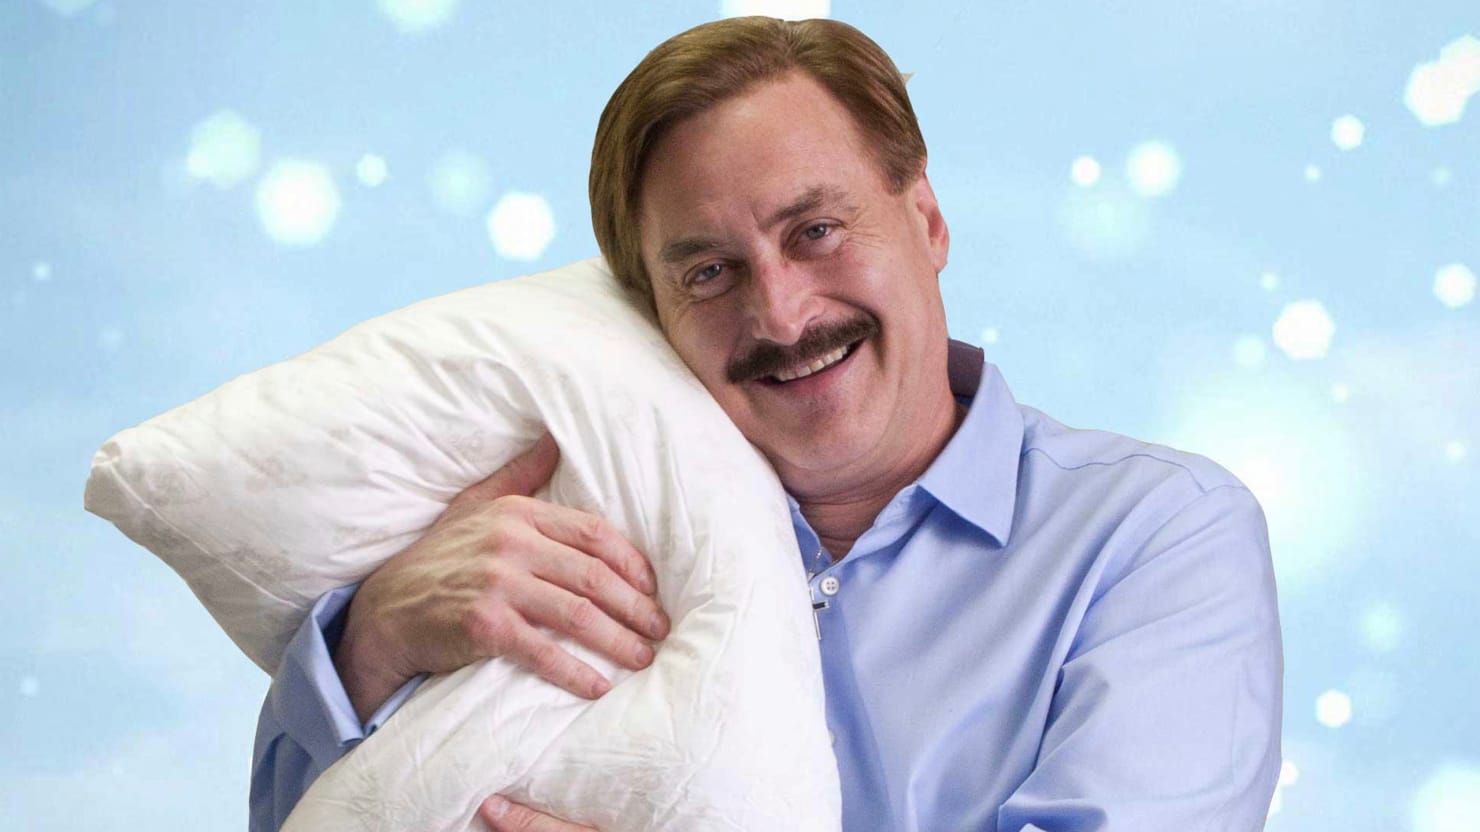 My Pillow: A Closer Look at the Company and the Man Behind It